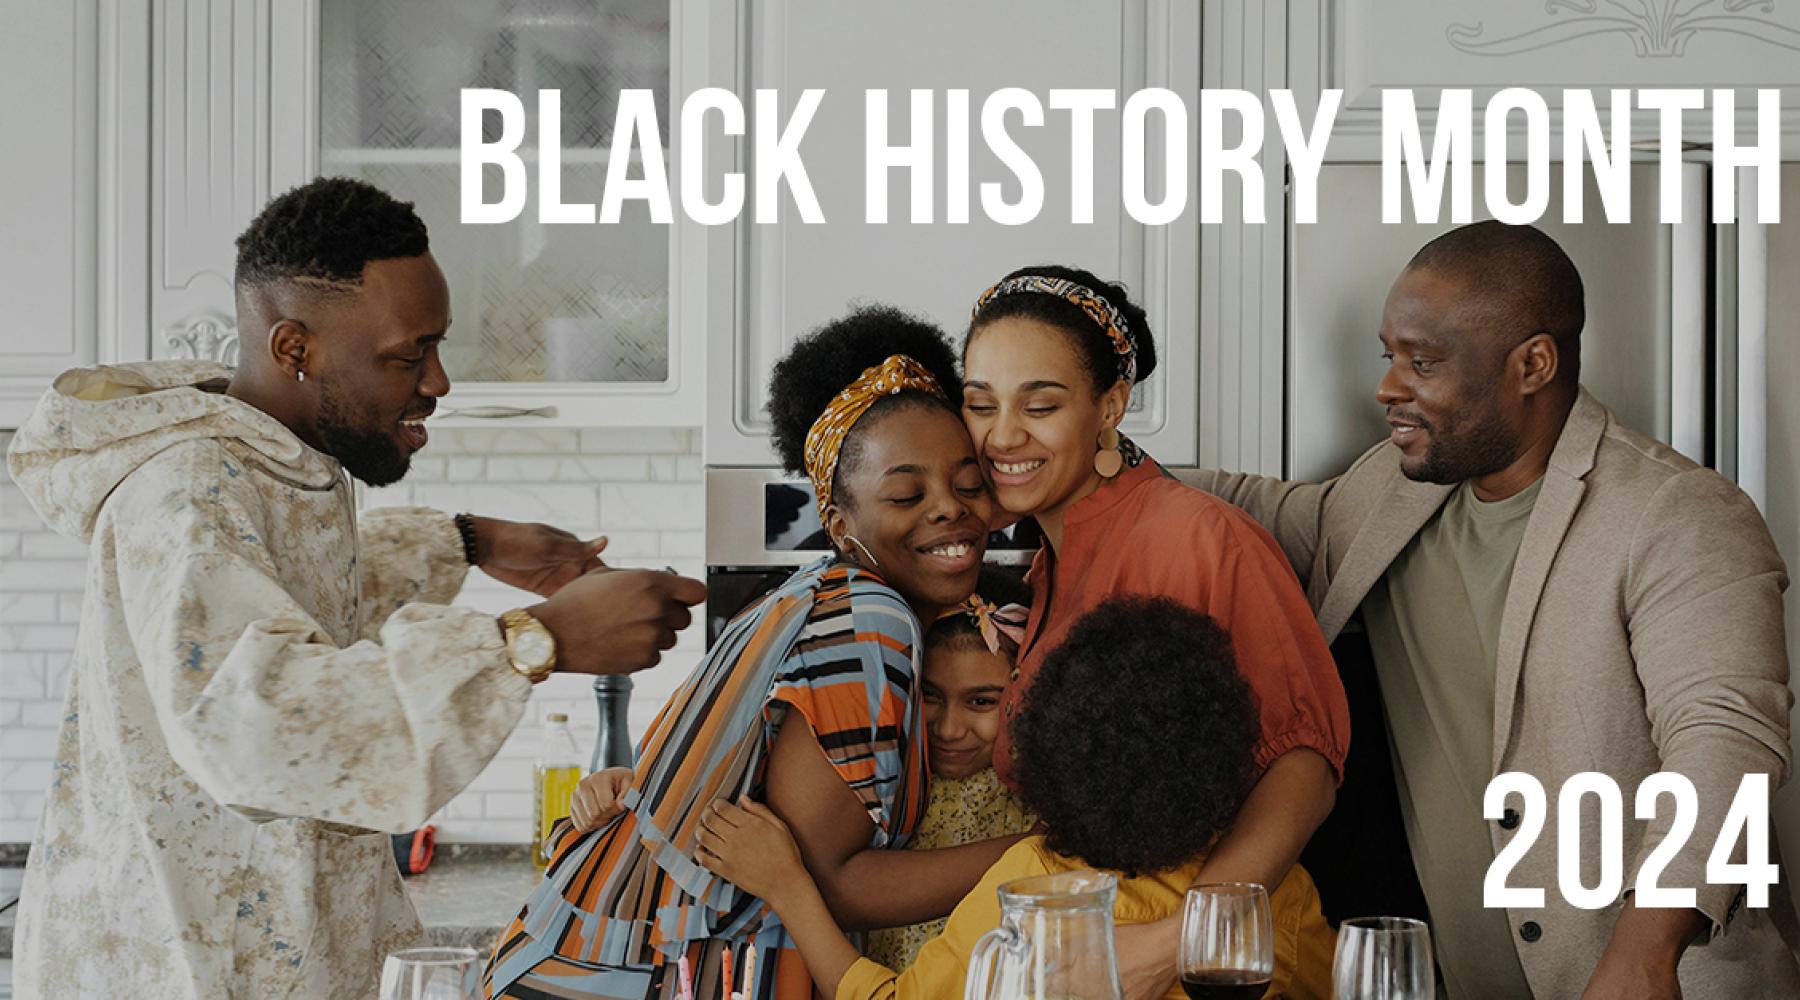 Background image of 6 people embracing in a kitchen, with text overlay reading "Black History Month 2024"